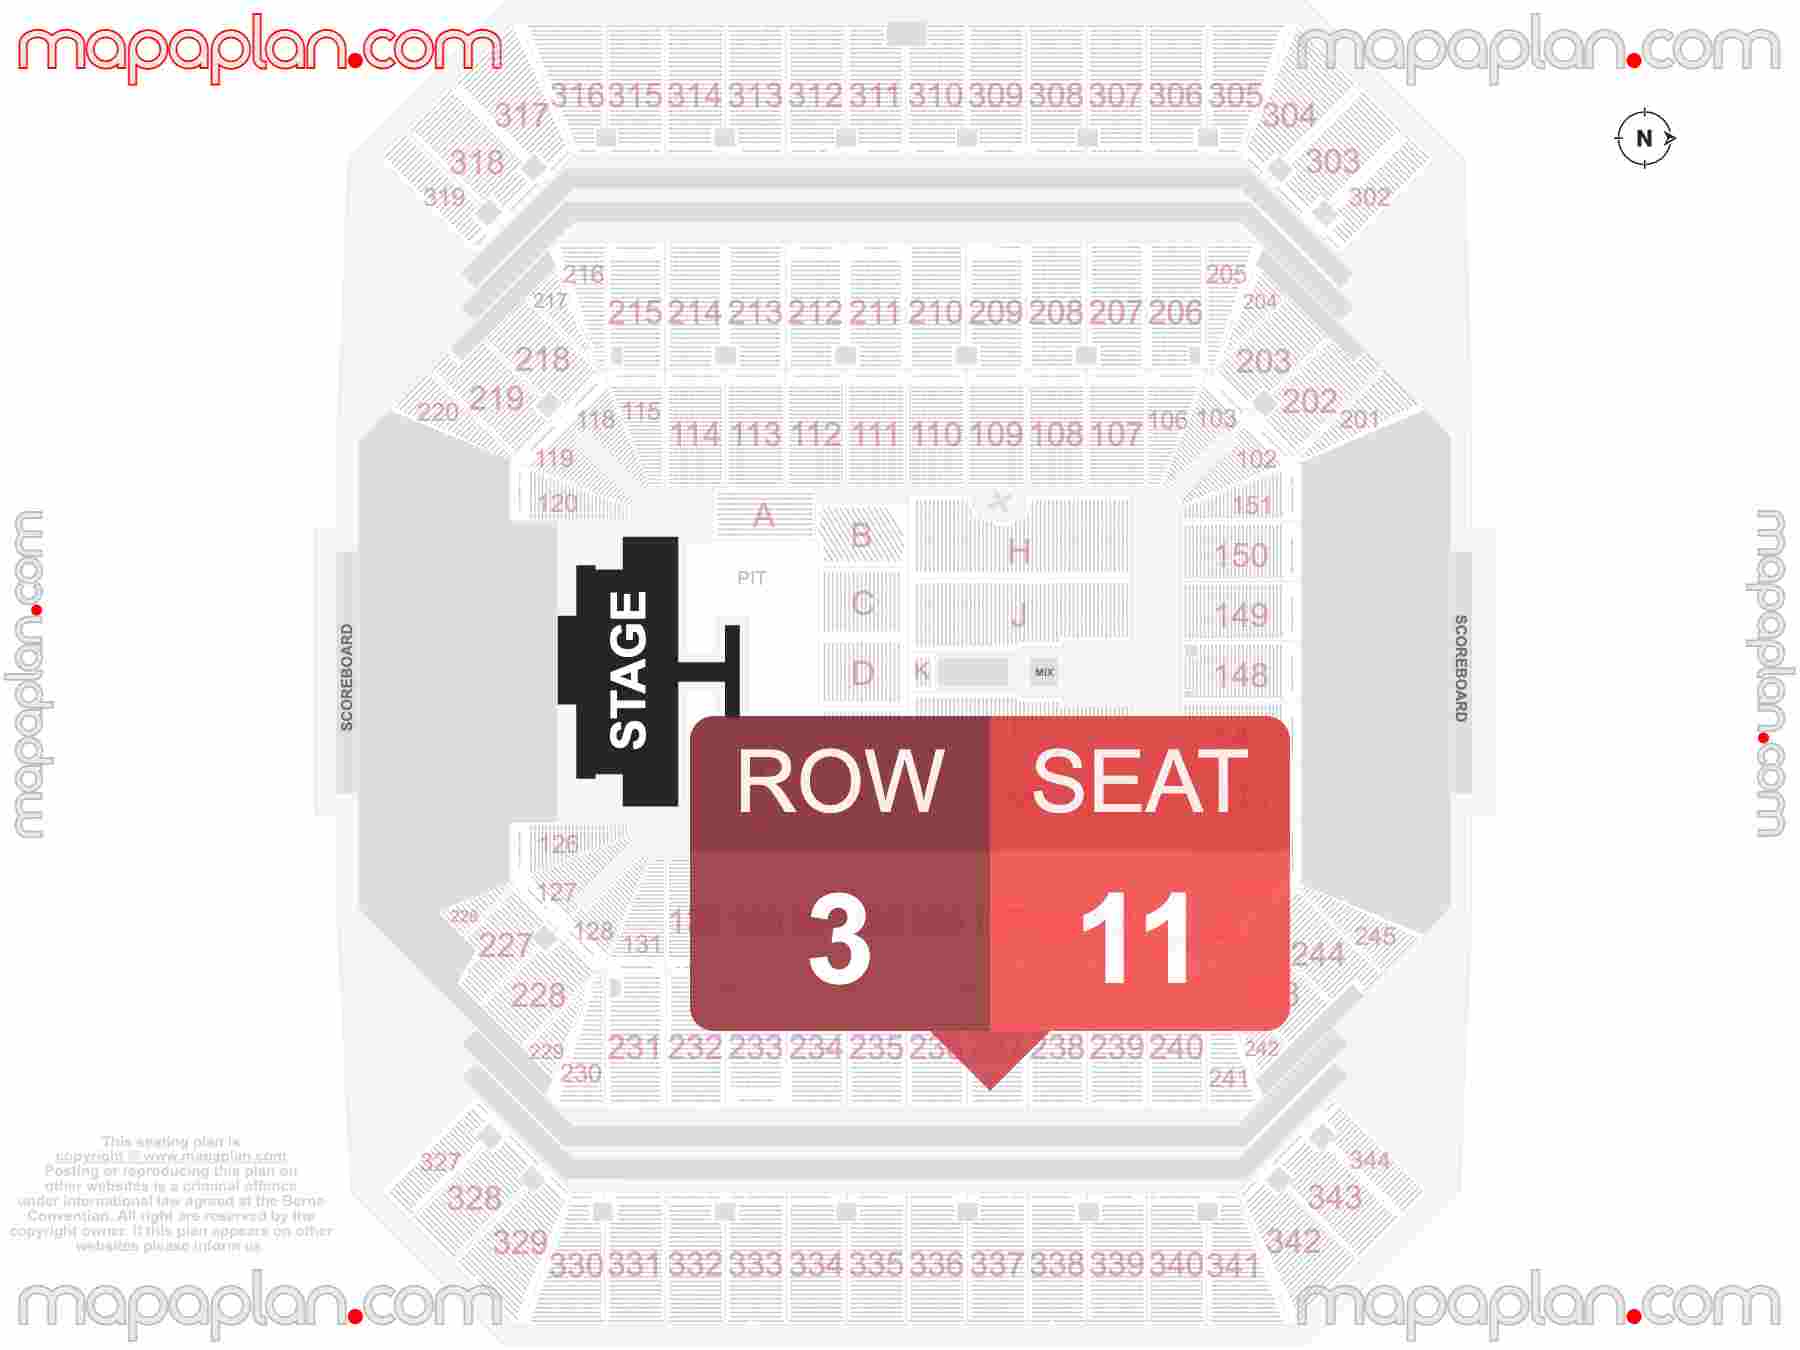 Tampa Raymond James Stadium seating chart Concert detailed seat numbers and row numbering chart with interactive map plan layout